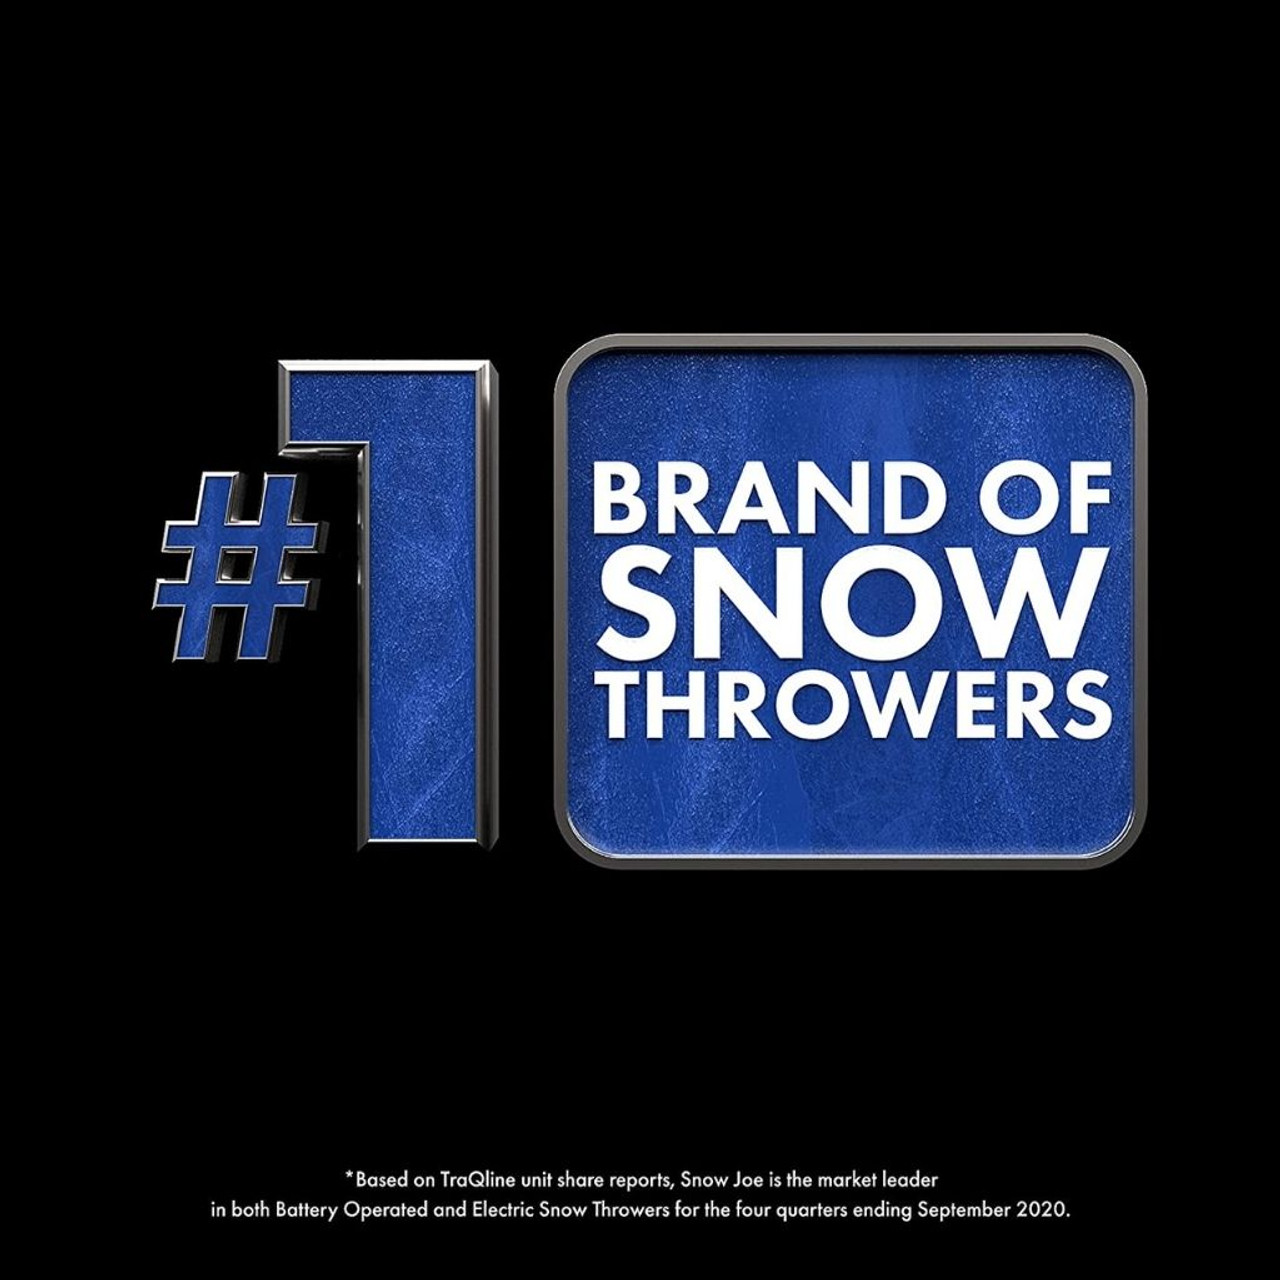 Snow Joe® iON+ Cordless 13" Snow Shovel with 4Ah Battery + Quick Charger product image